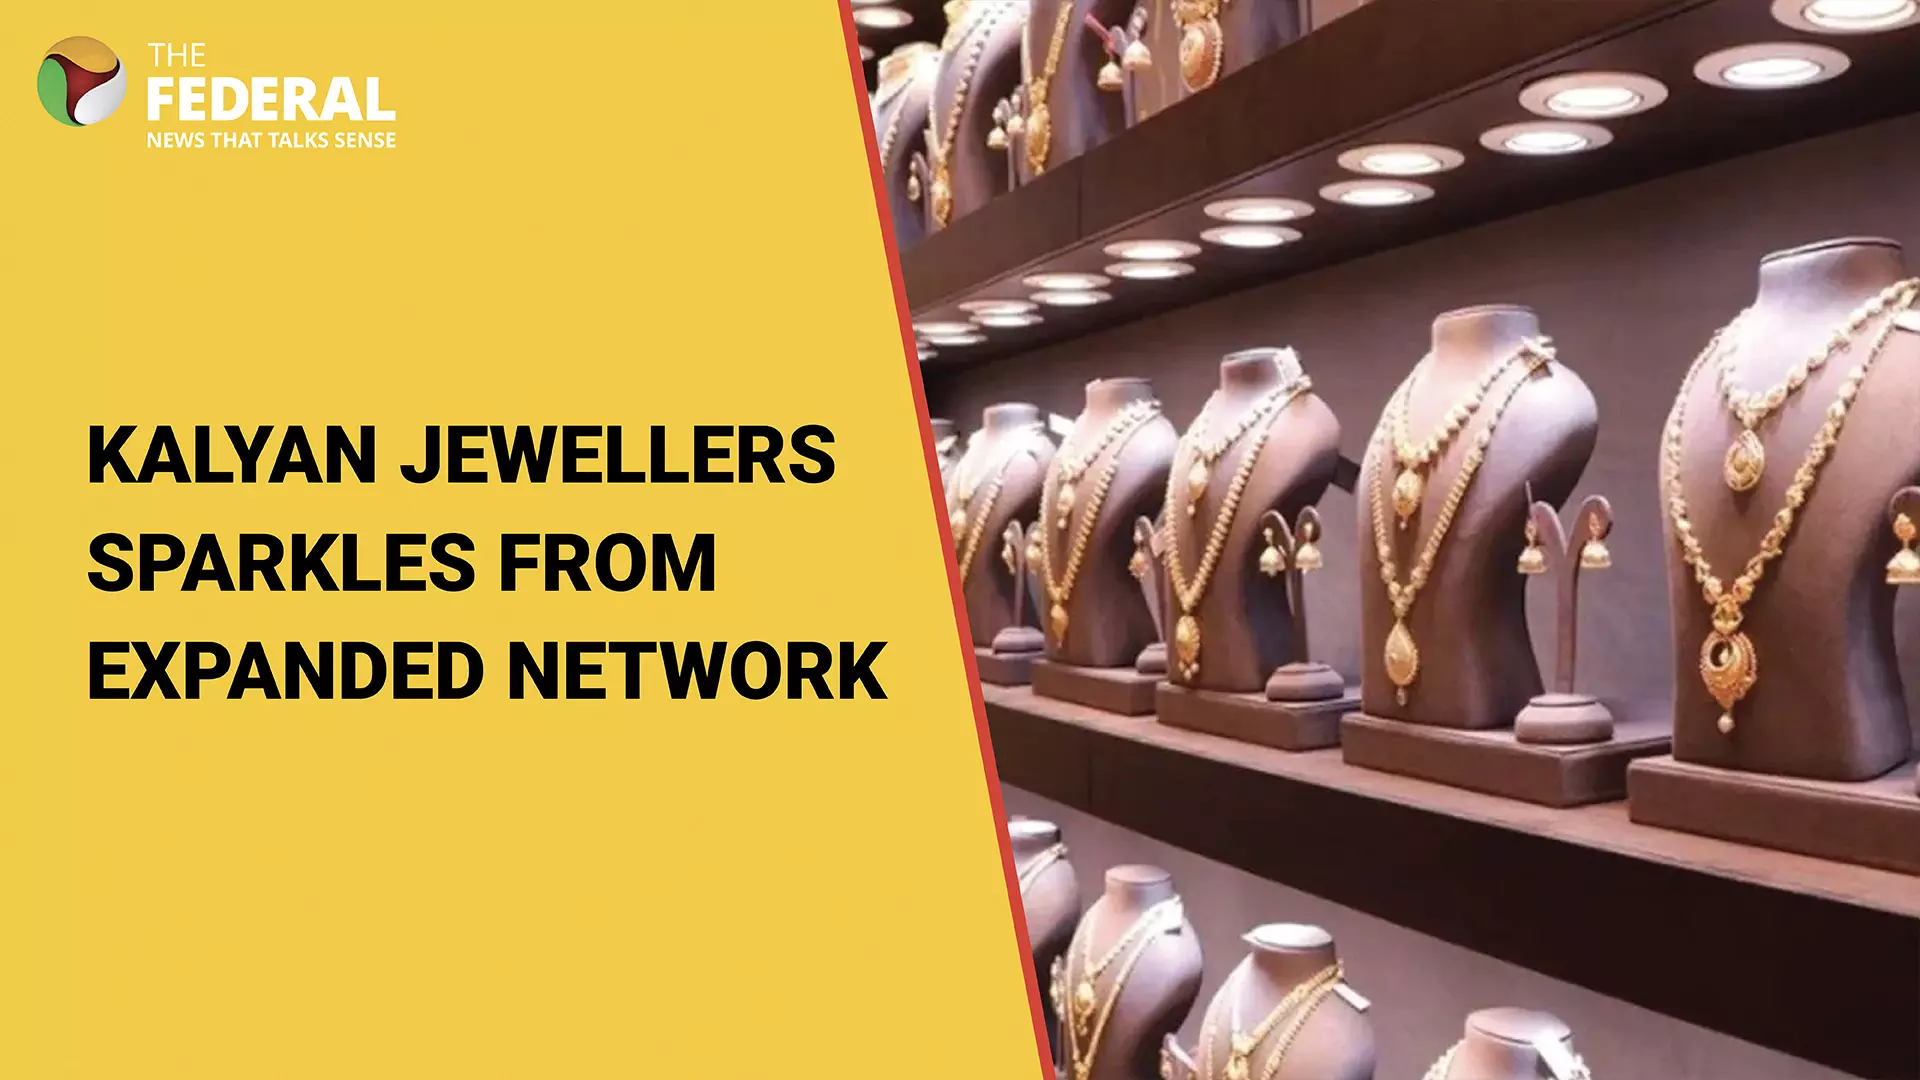 Kalyan Jewellers sparkles from expanded network